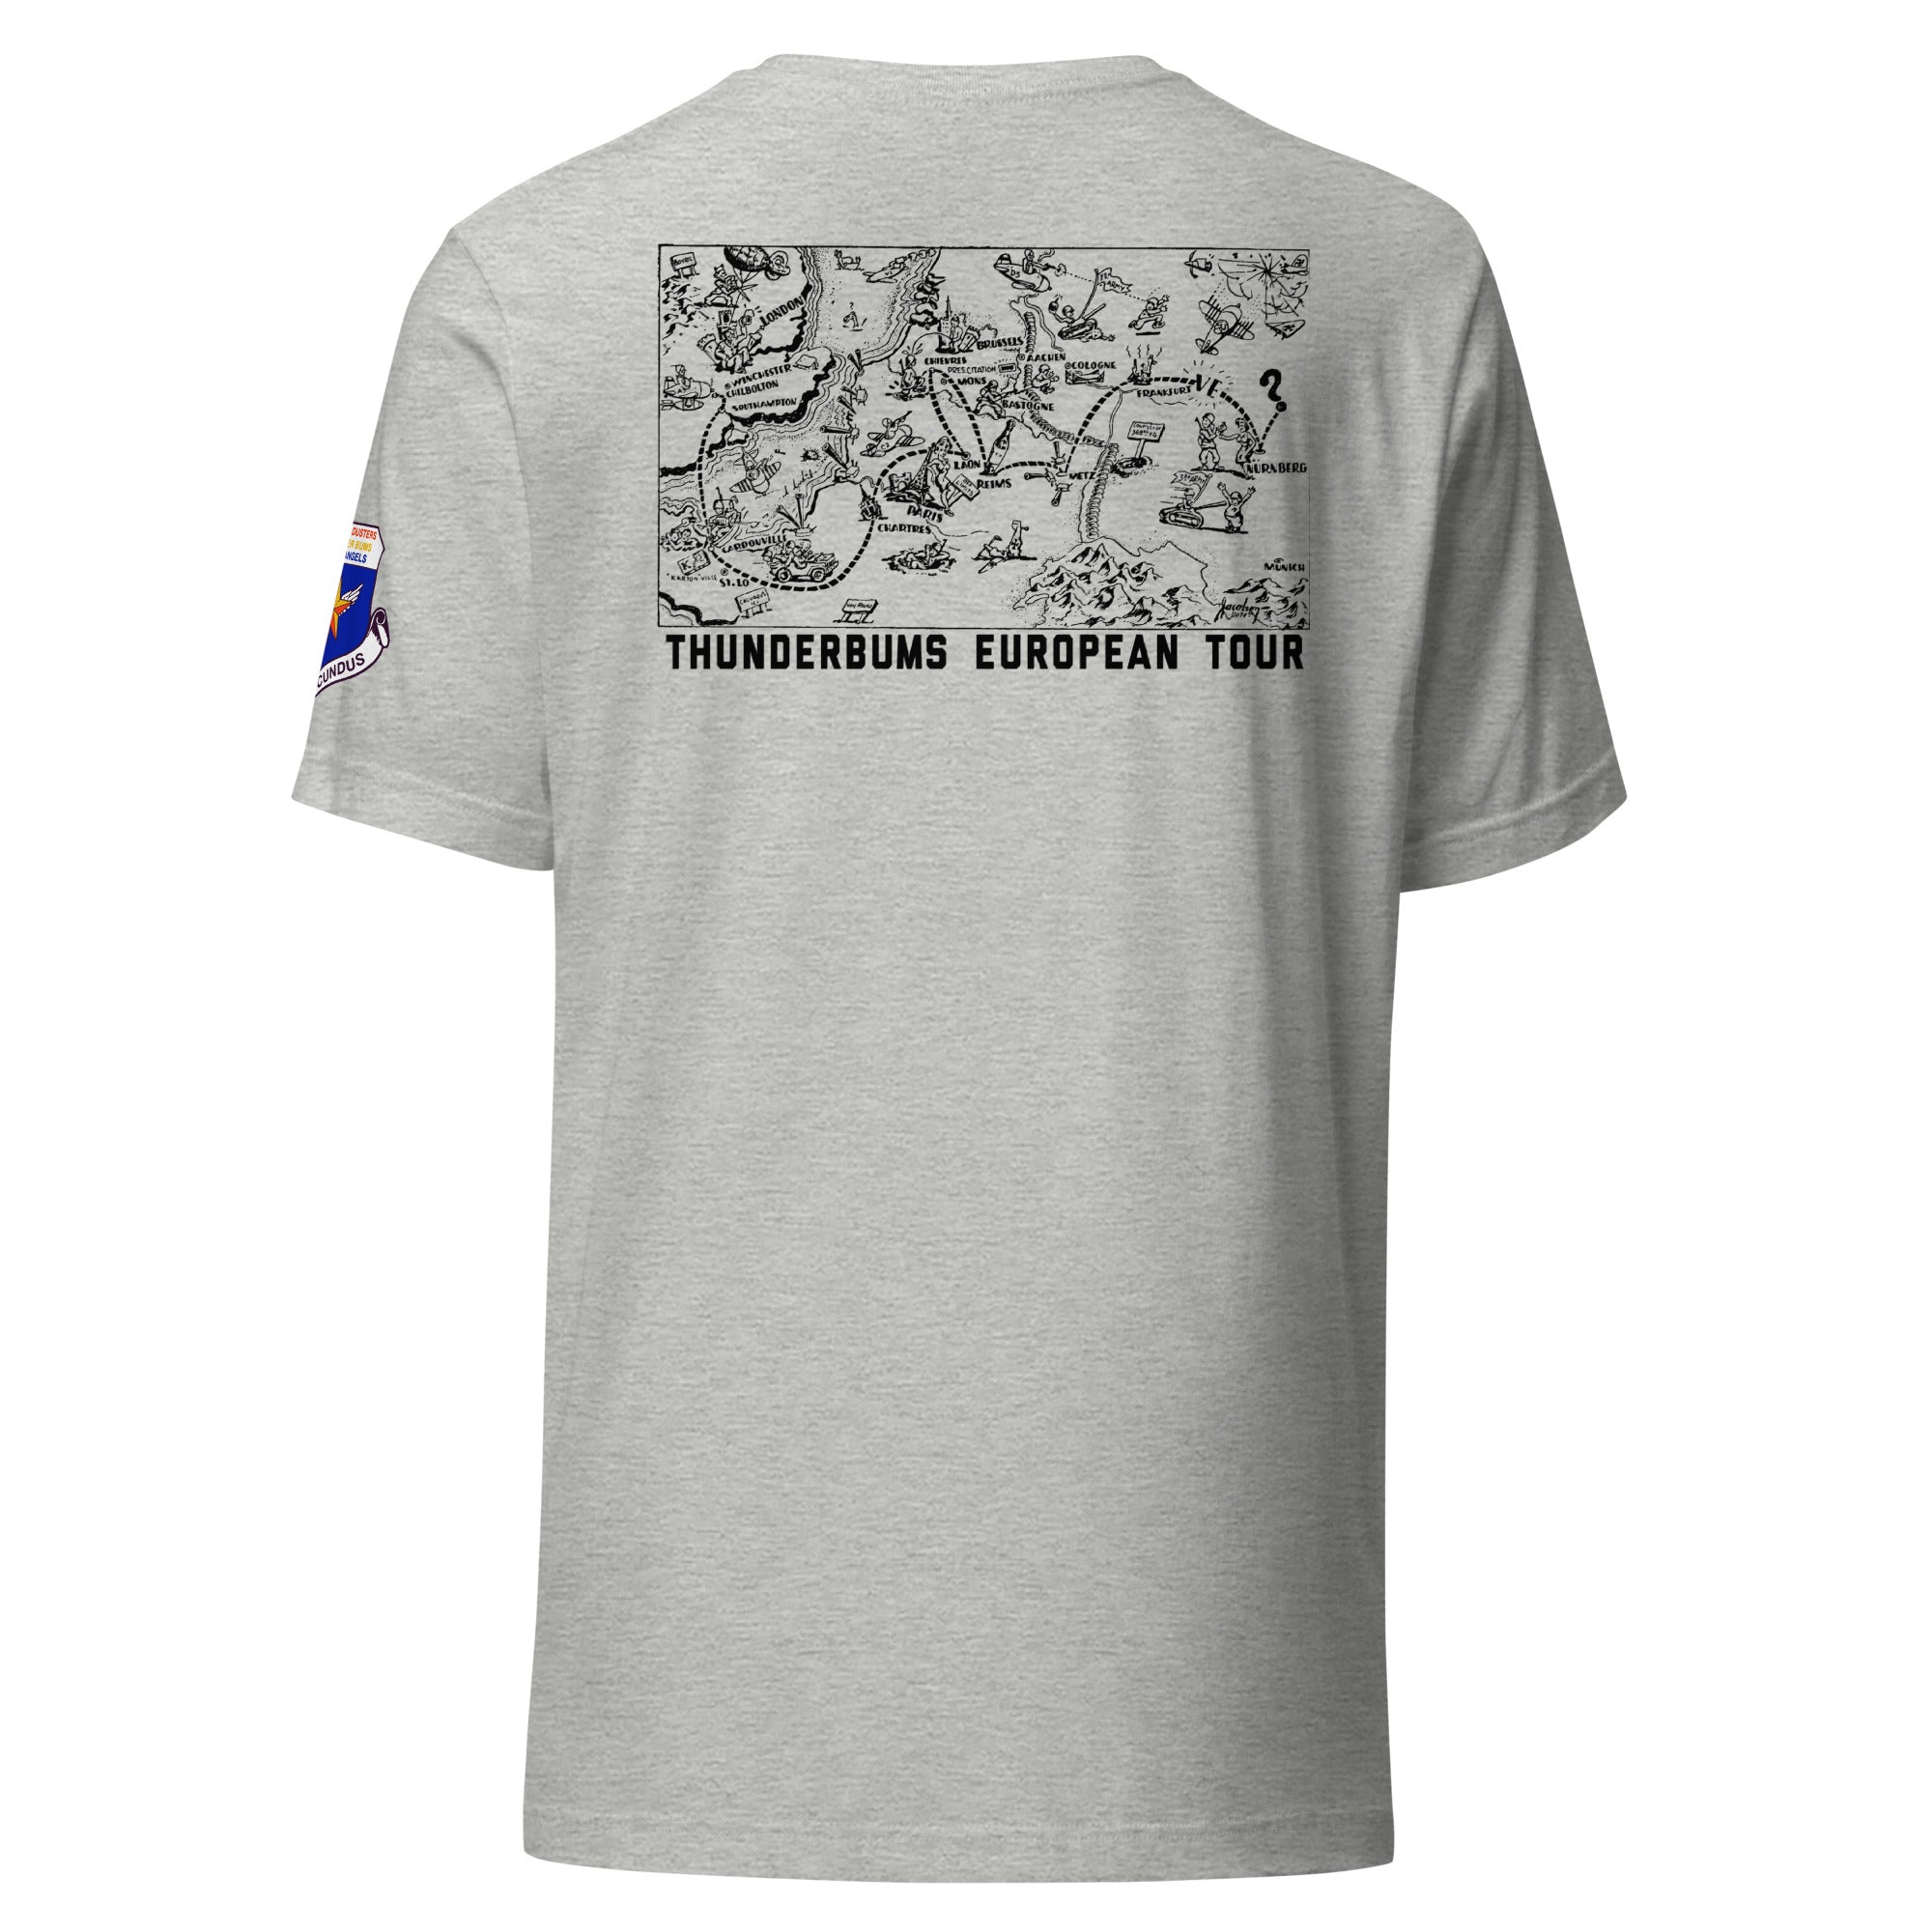 396 Fighter Squadron Thunder Bums WWII T-shirt